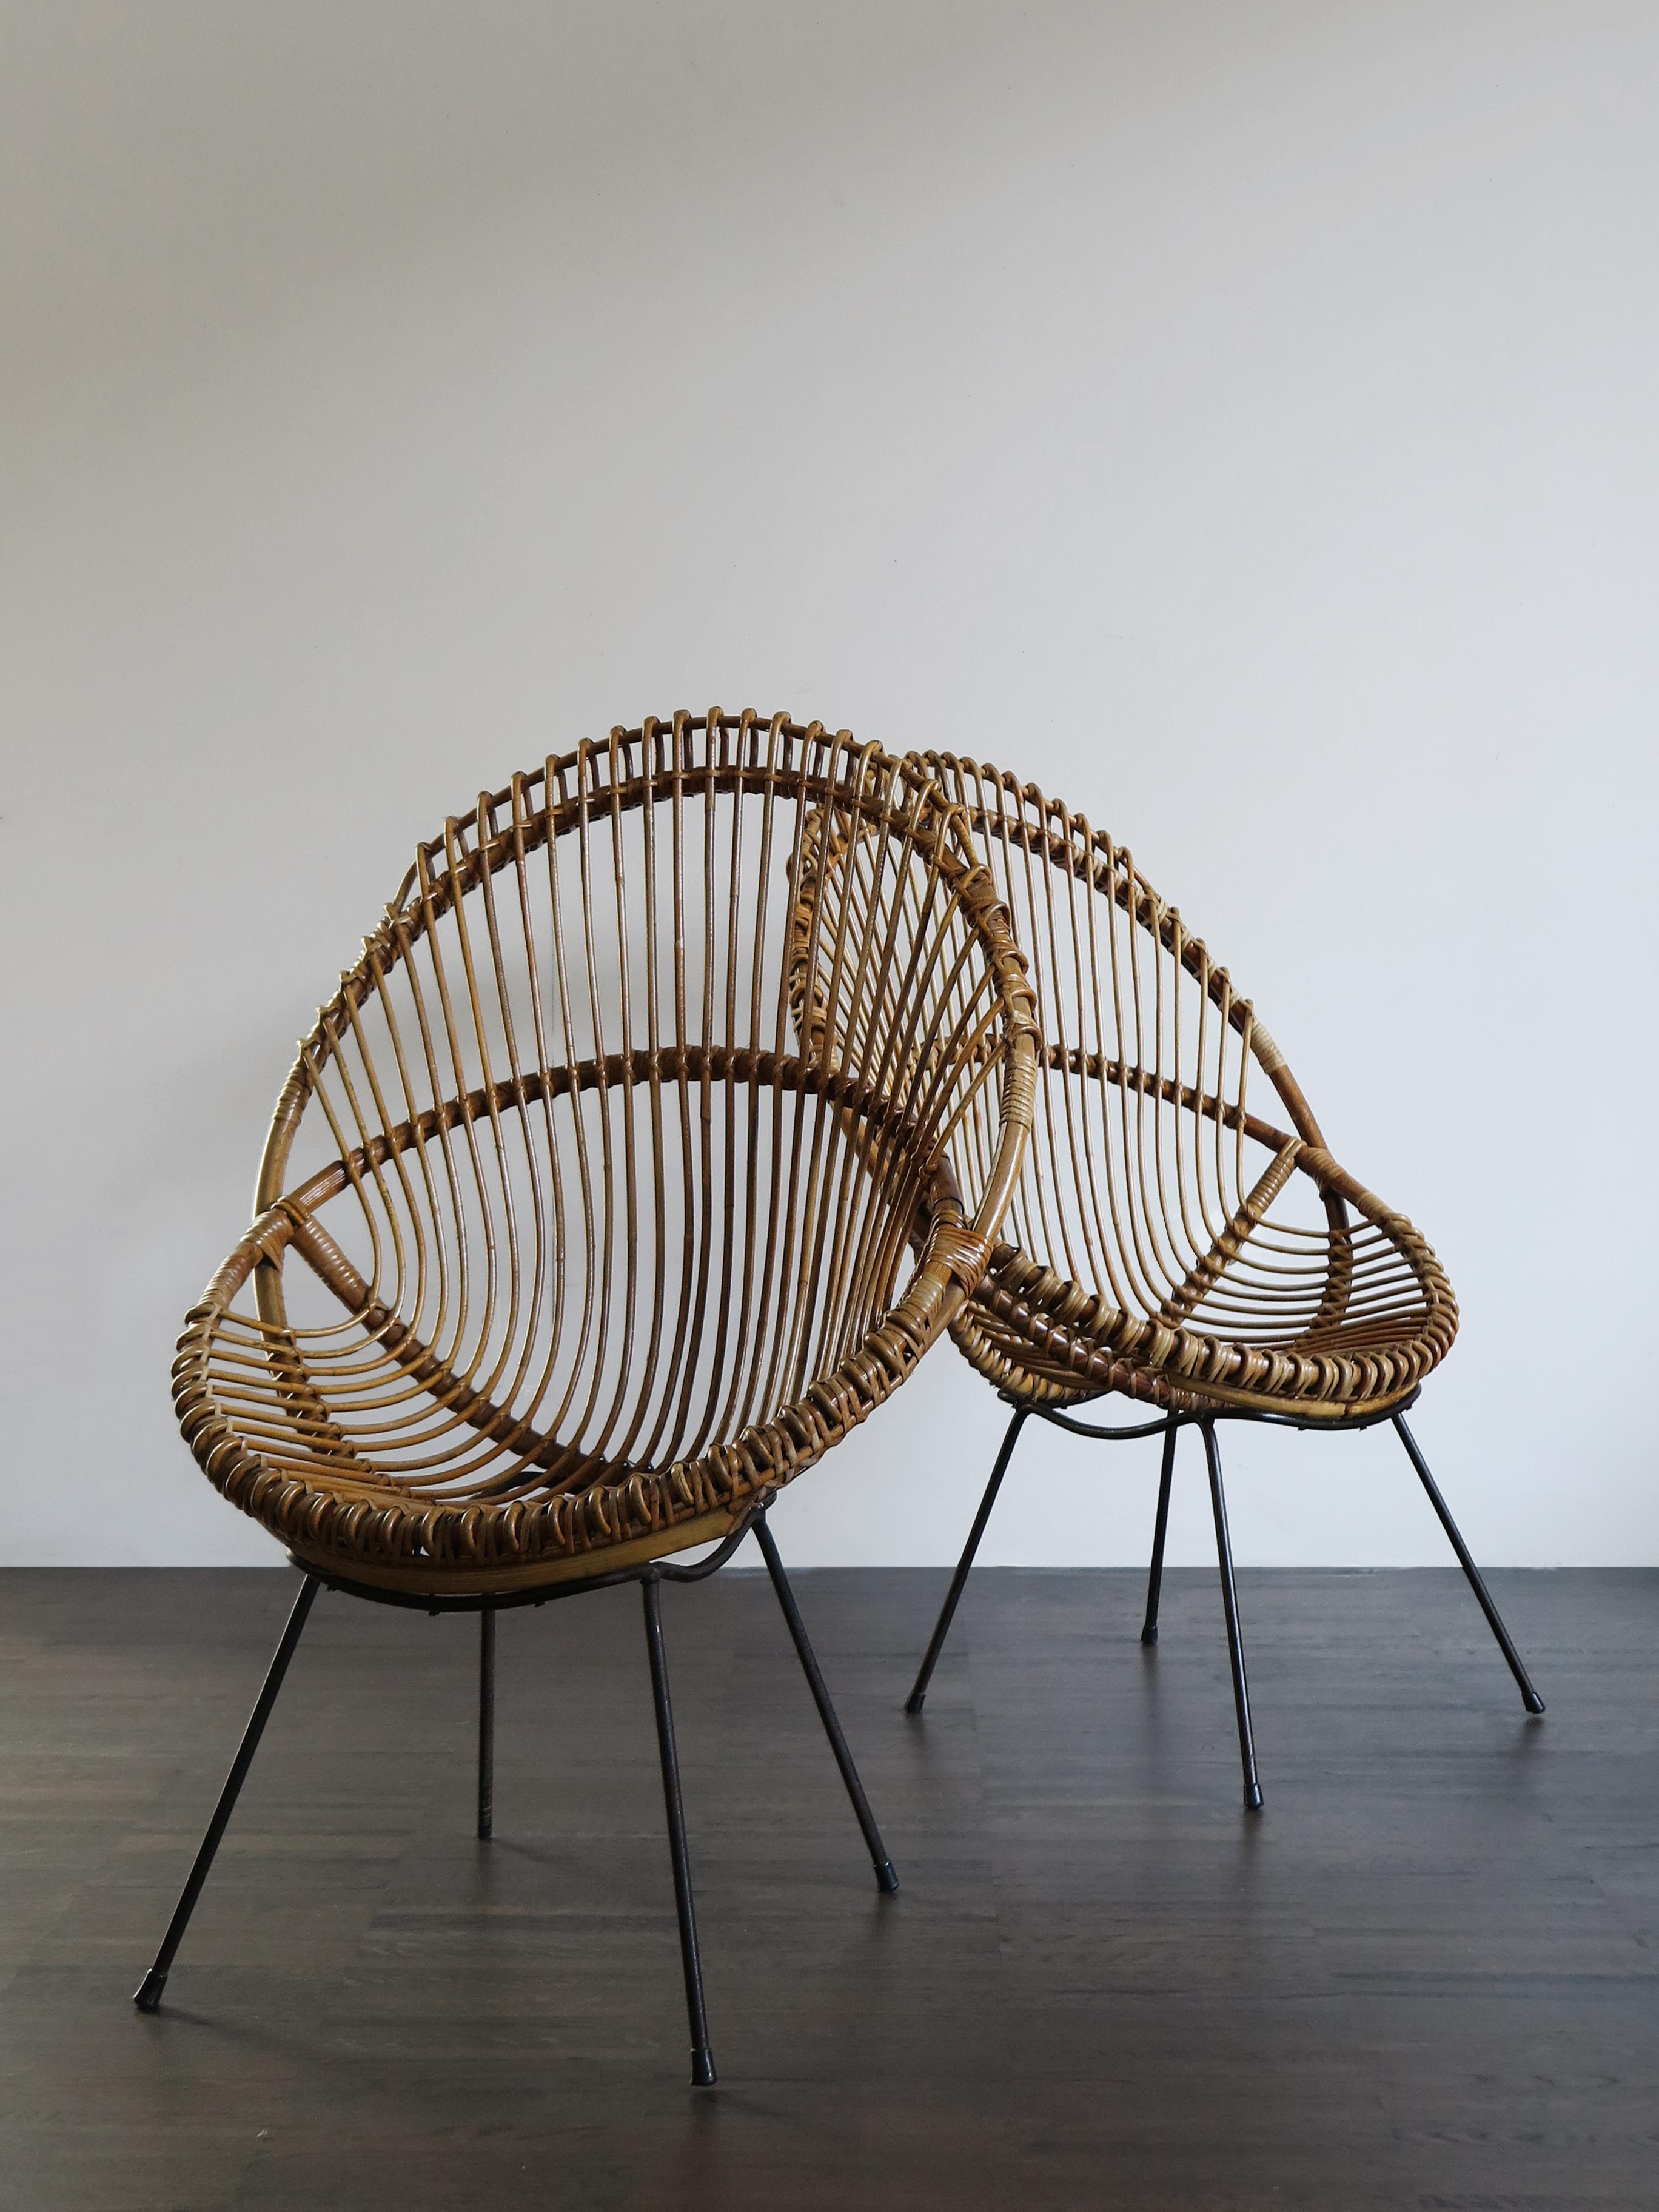 Couple of Italian Mid-Century Modern design chairs armchair in bamboo, rush, cane and structure with black painted iron rod, 1960s.

Please note that the items are original of the period and this shows normal signs of age and use.